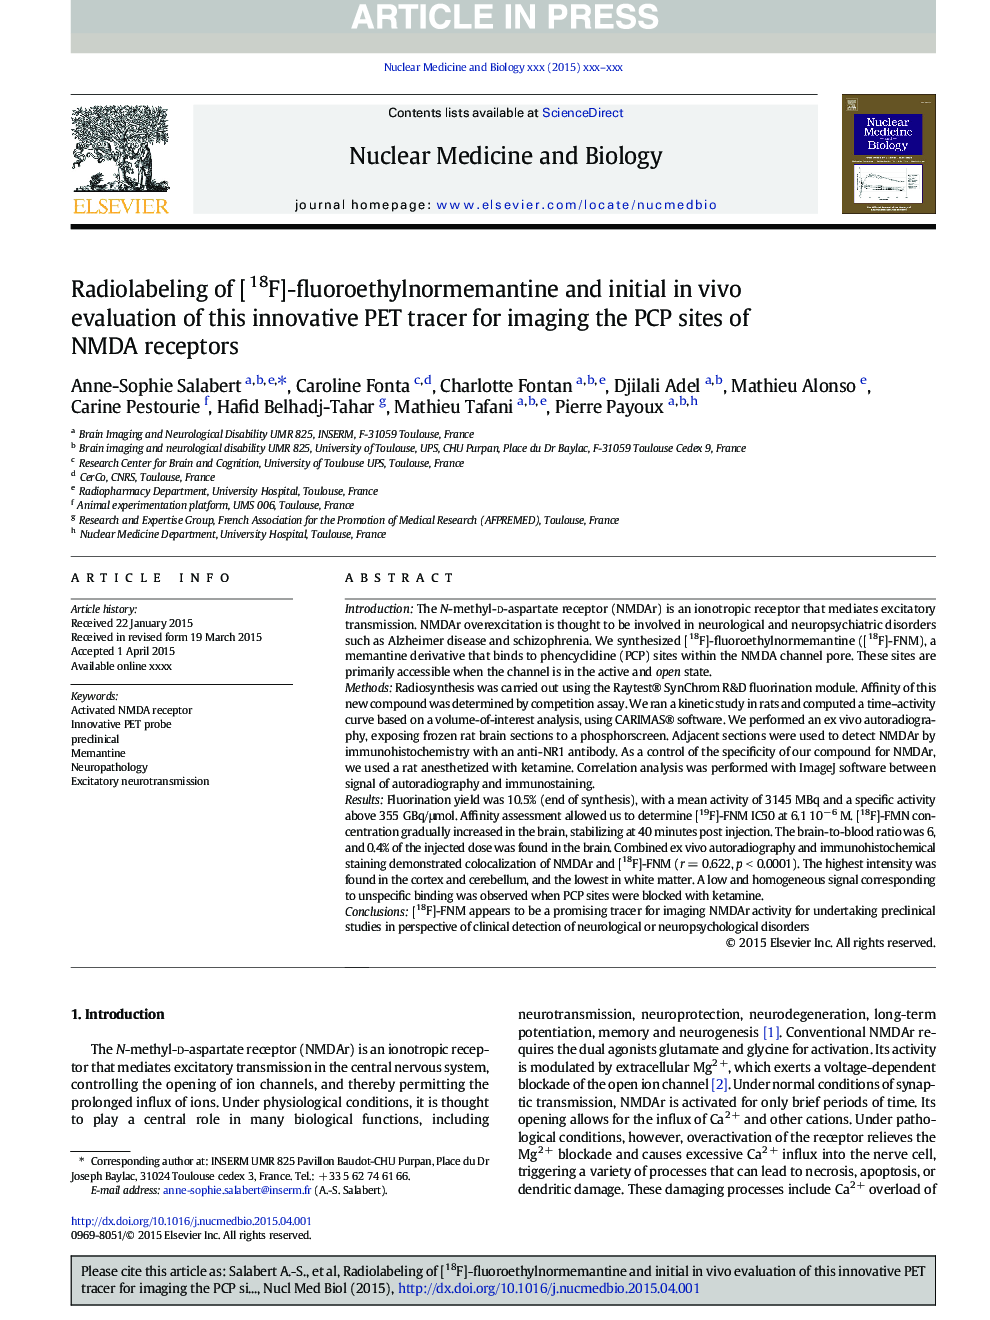 Radiolabeling of [18F]-fluoroethylnormemantine and initial in vivo evaluation of this innovative PET tracer for imaging the PCP sites of NMDA receptors